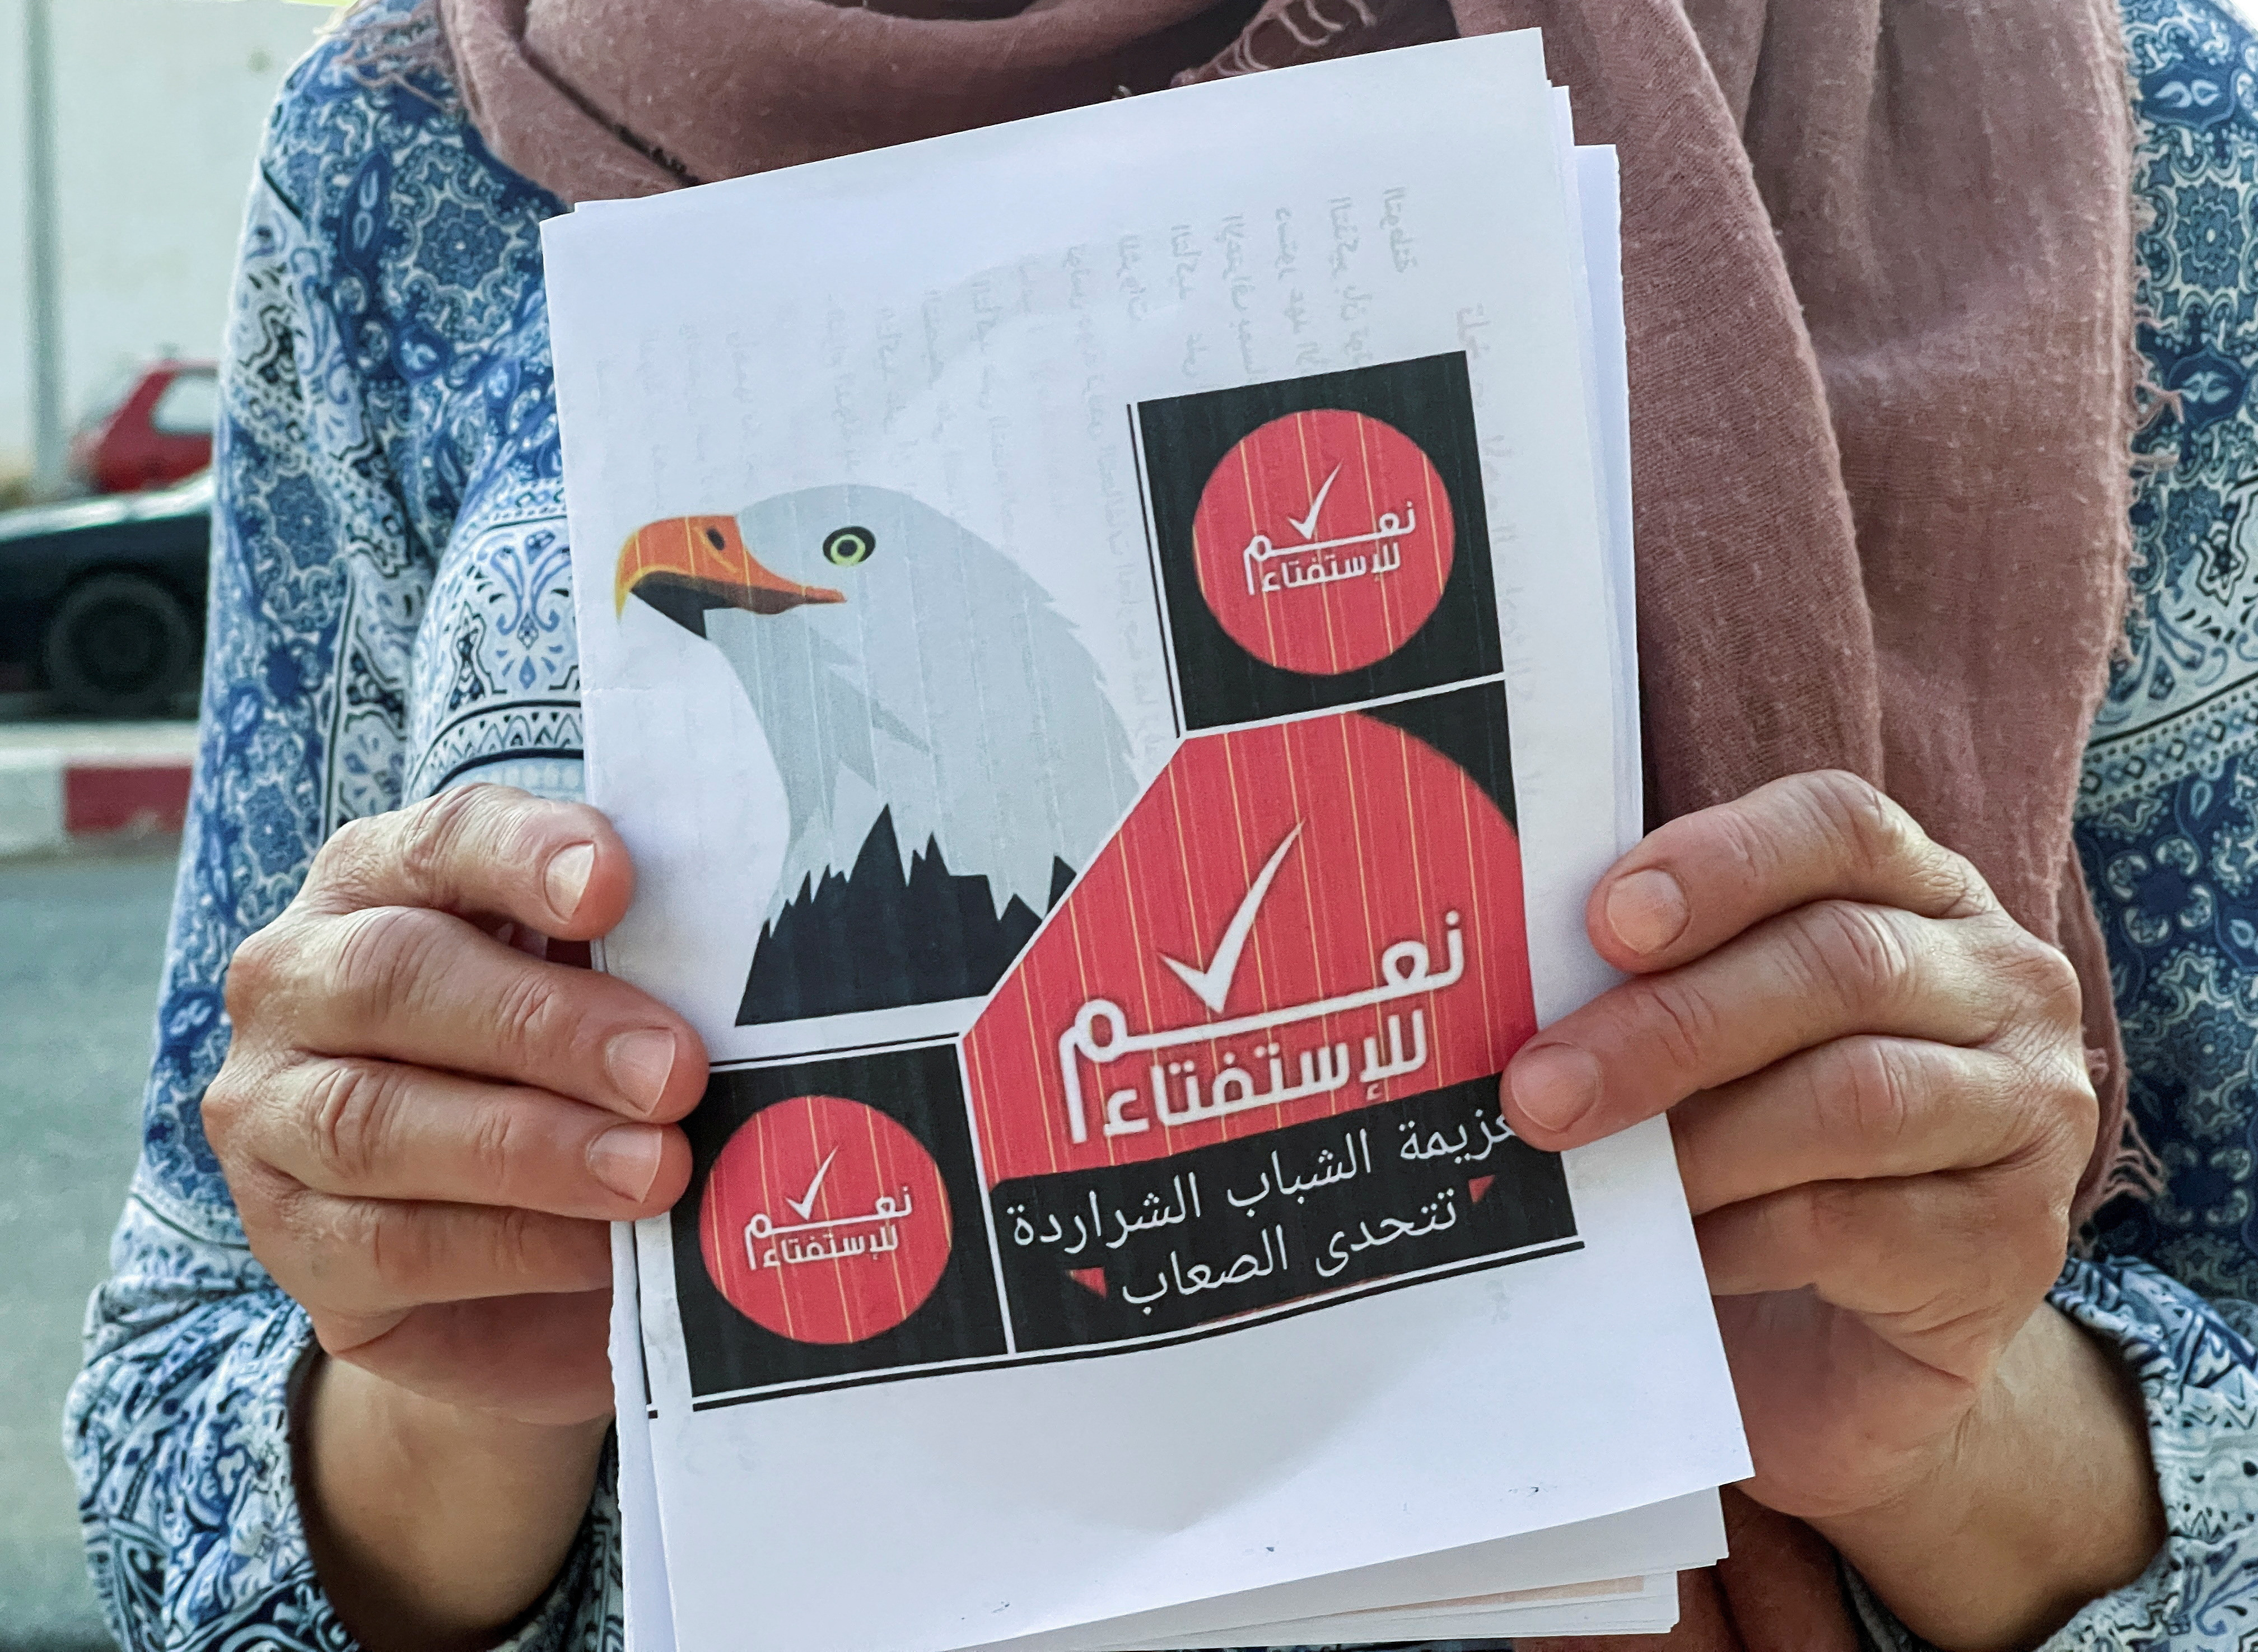 A volunteer displays a campaign flyer for an upcoming referendum on a new constitution, in Kairouan